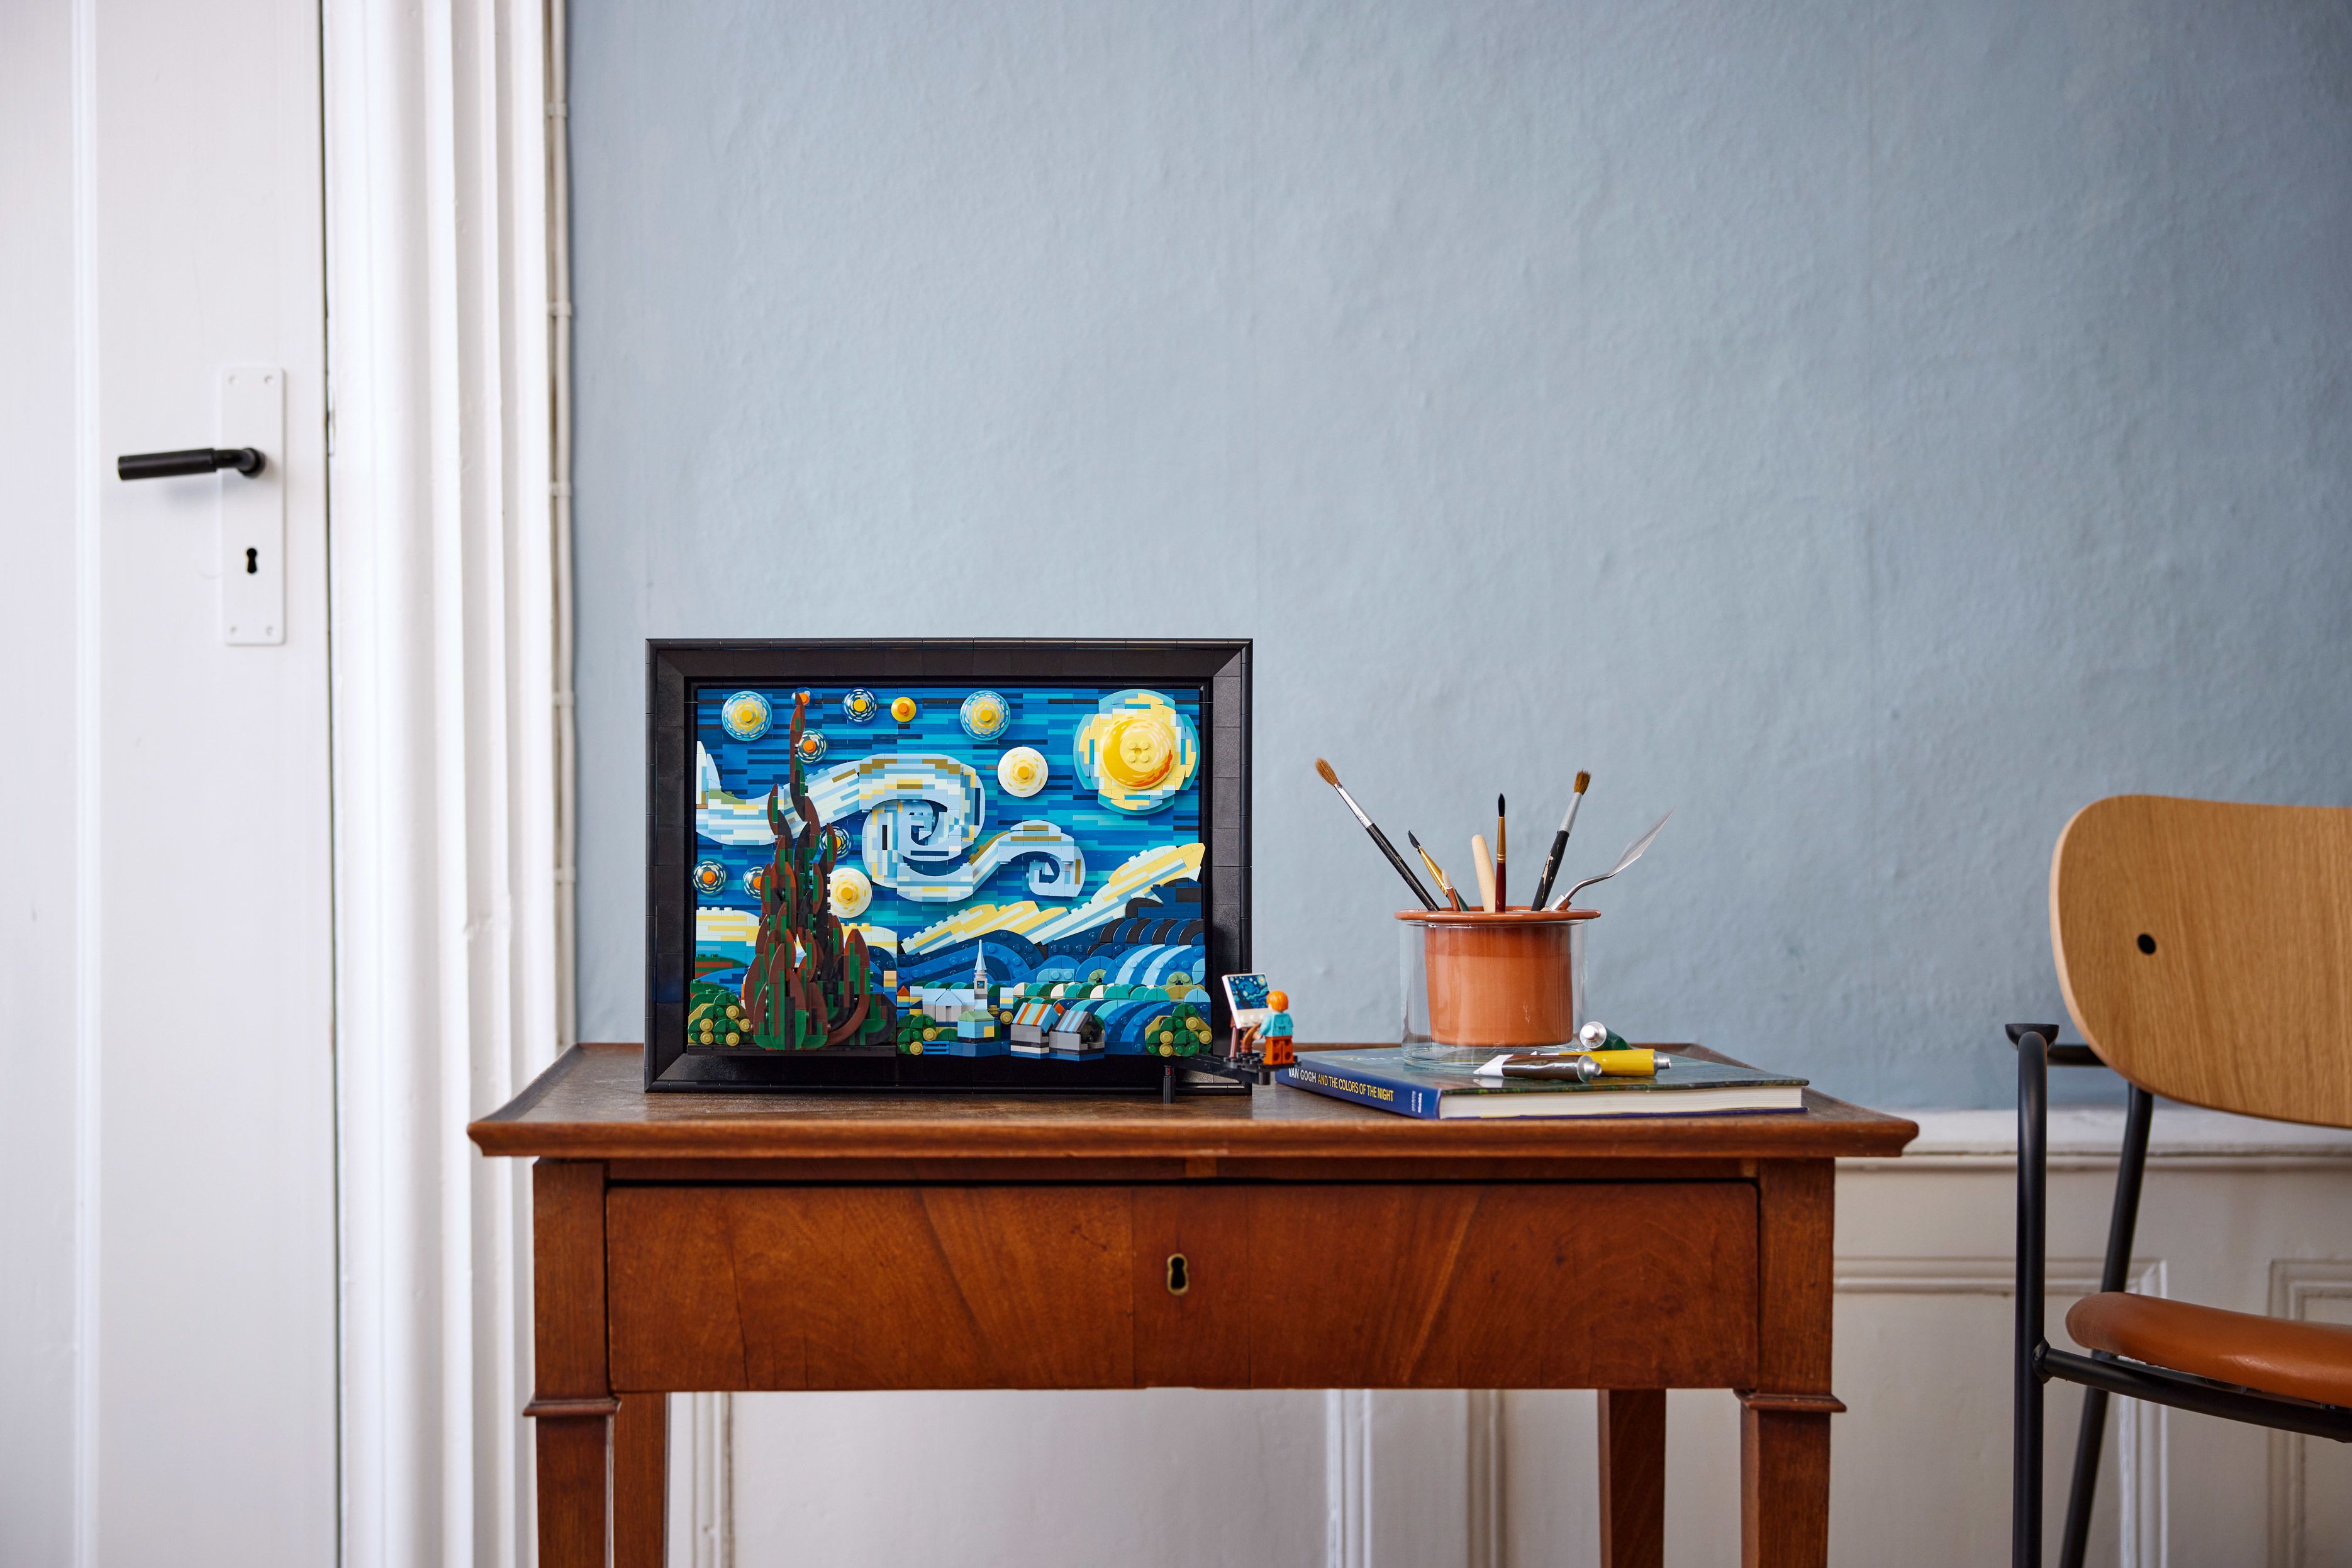 Van Gogh's 'The Starry Night' reimagined by LEGO in 2,316 bricks